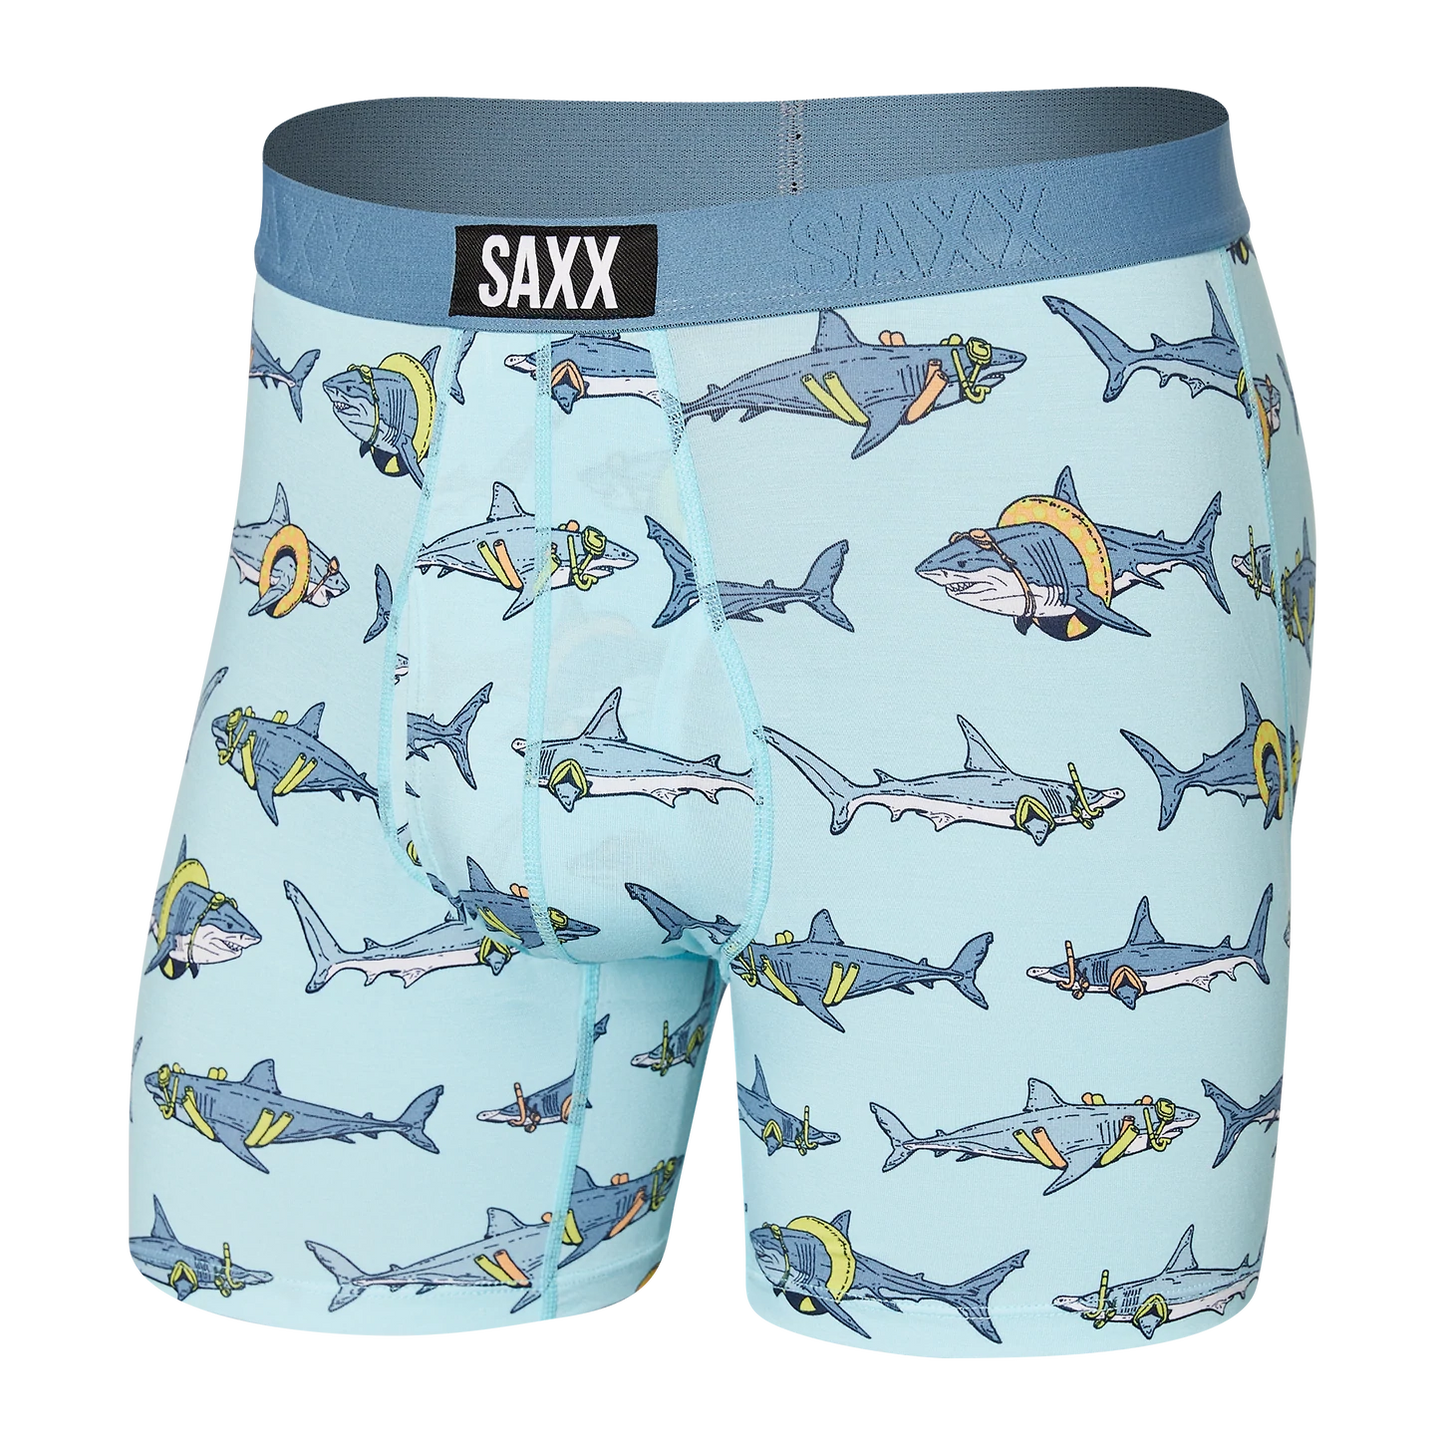 SAXX ULTRA BOXER BRIEF - POOL SHARKS IN SEA GLASS